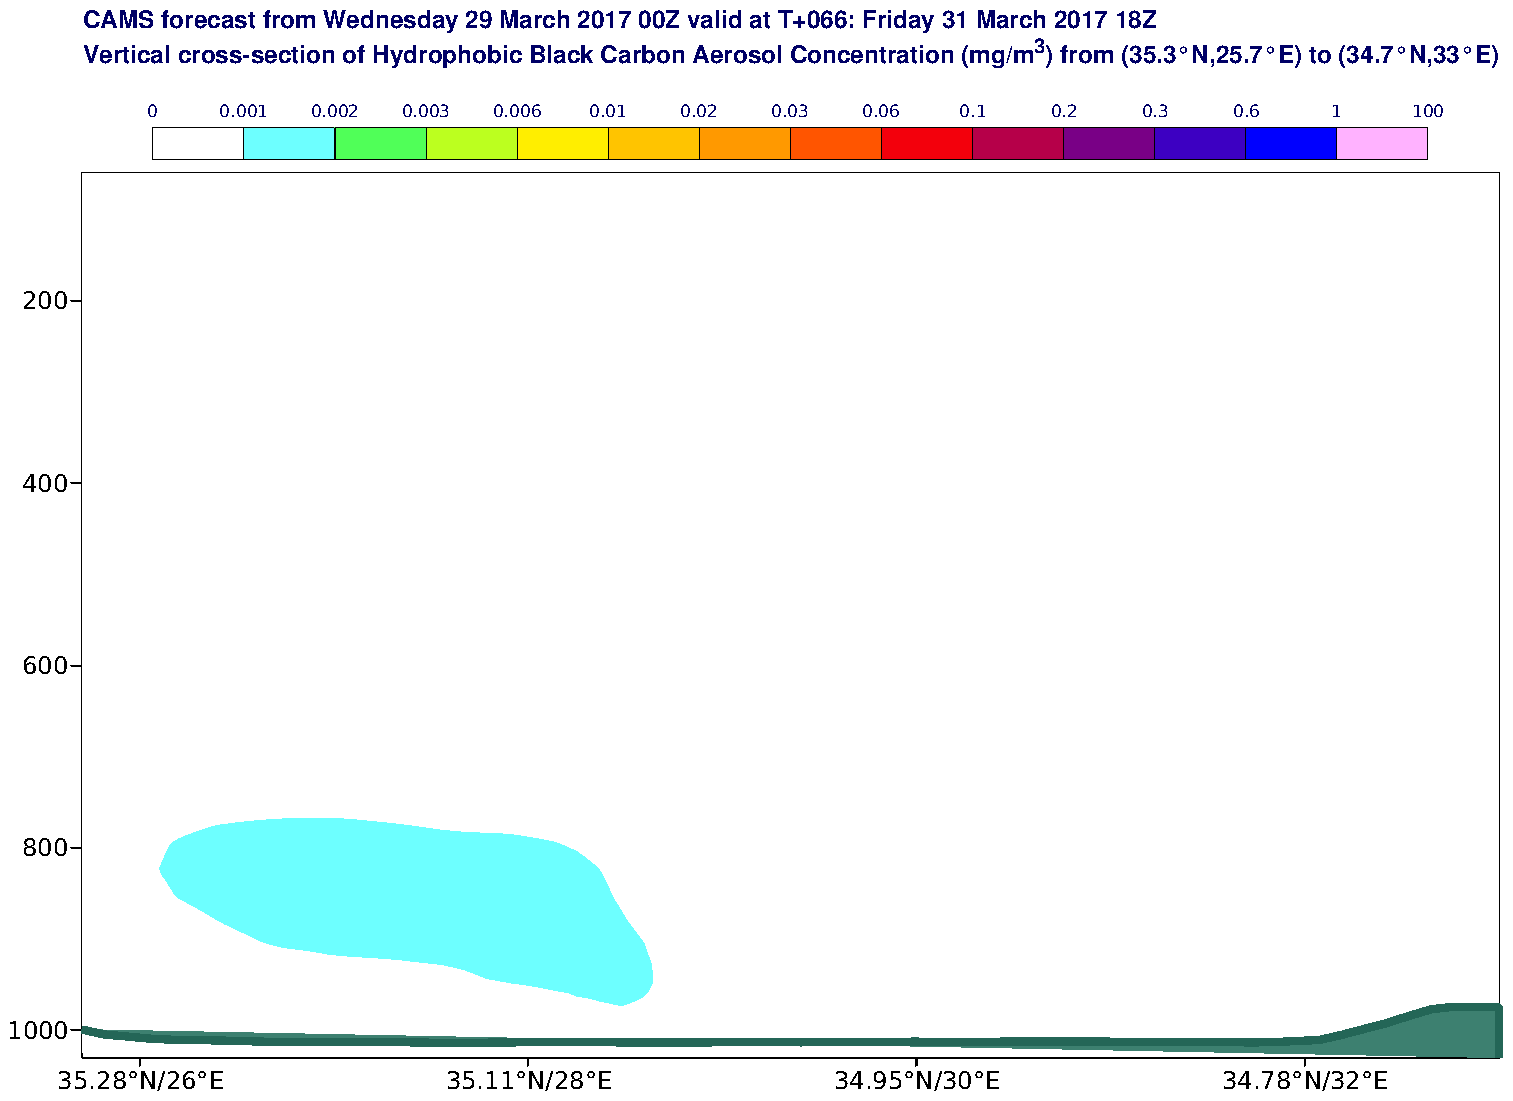 Vertical cross-section of Hydrophobic Black Carbon Aerosol Concentration (mg/m3) valid at T66 - 2017-03-31 18:00